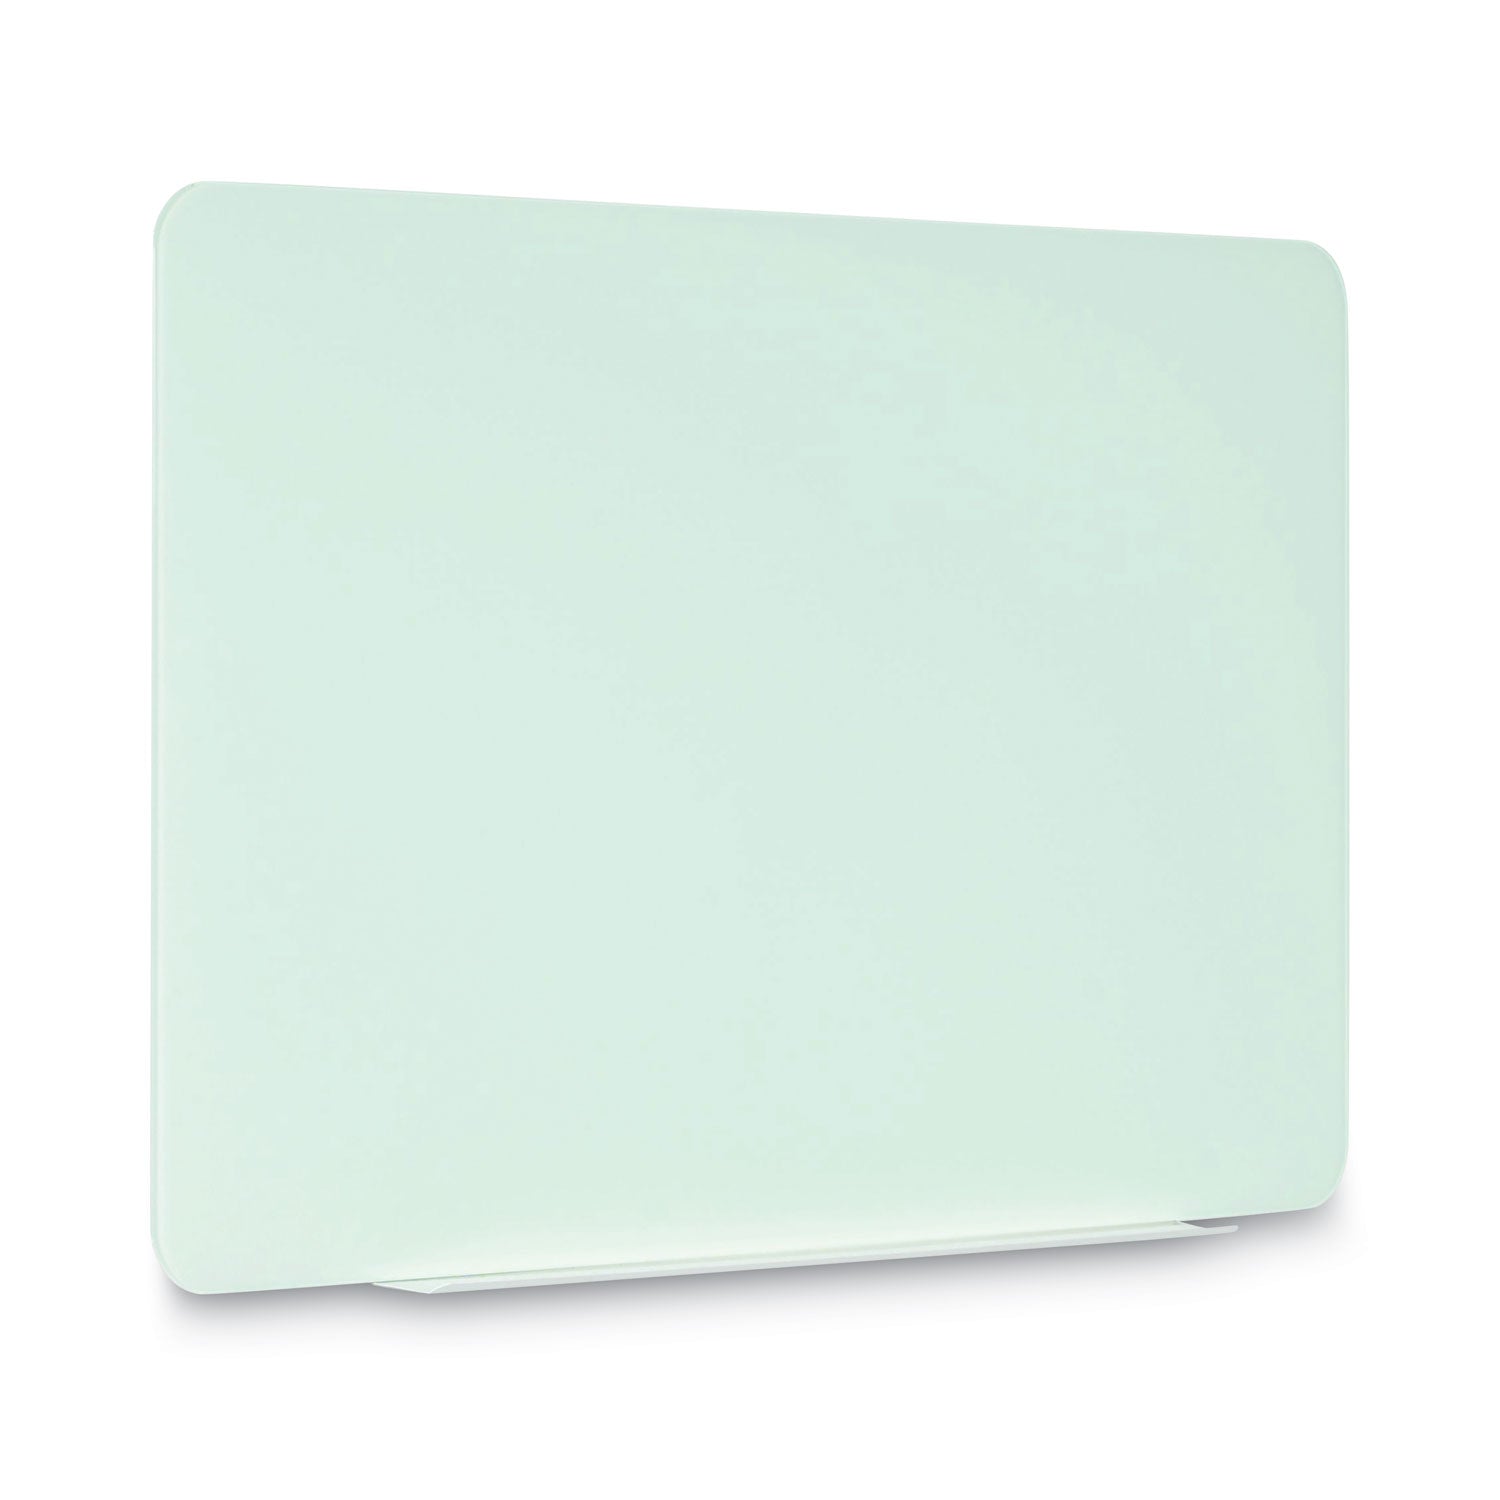 magnetic-glass-dry-erase-board-60-x-48-opaque-white-surface_bvcgl110101 - 6